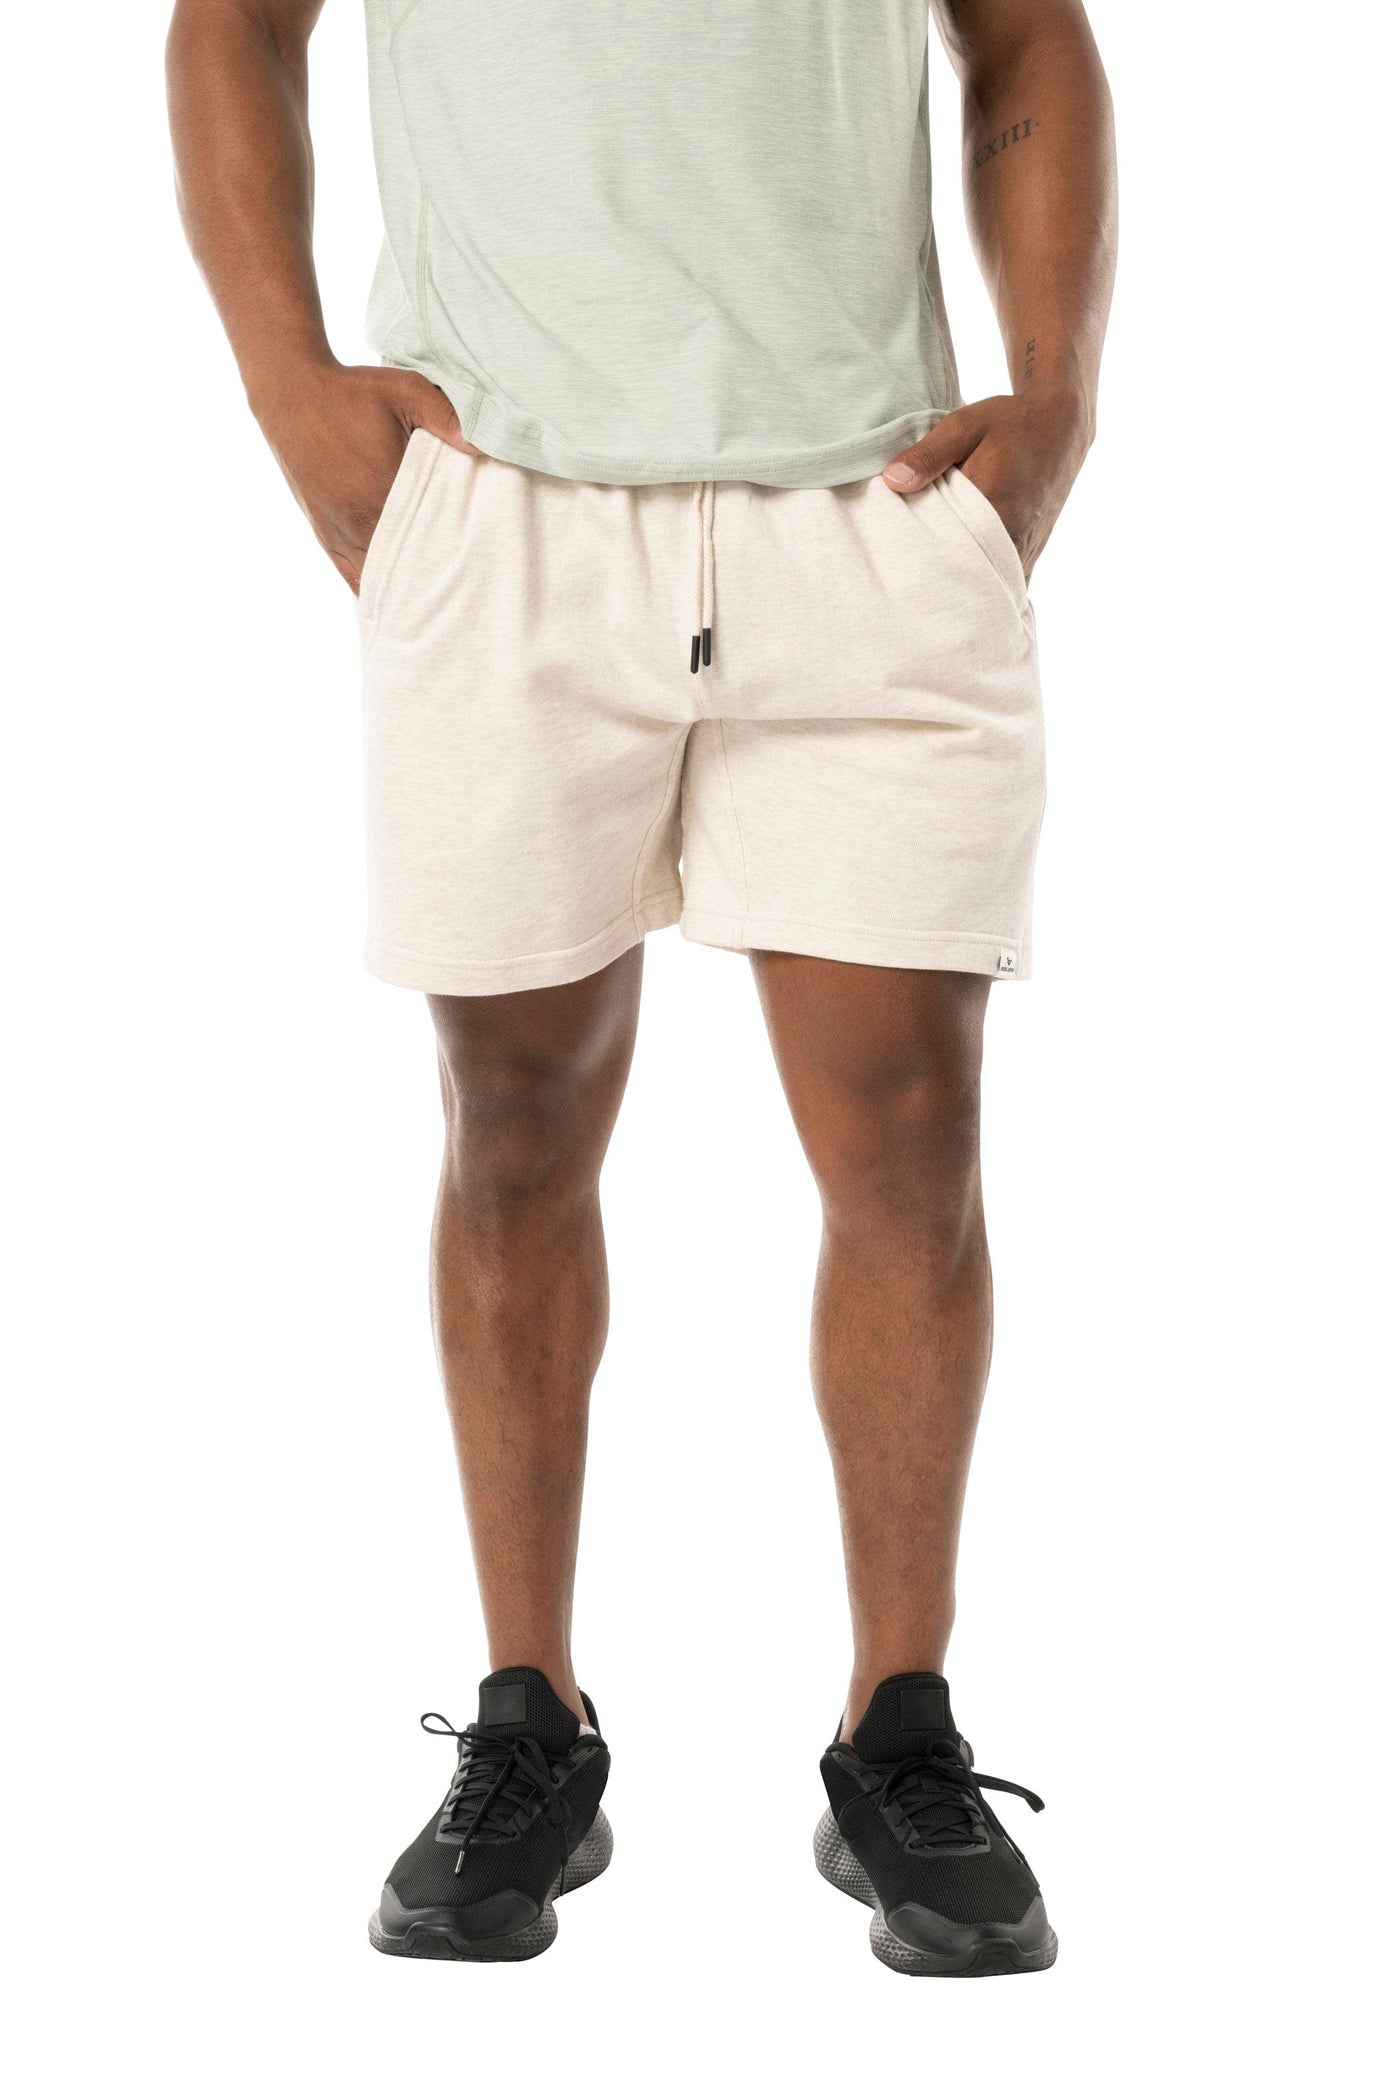 Bauer FLC Mens Knit Shorts - Oat - The Hockey Shop Source For Sports